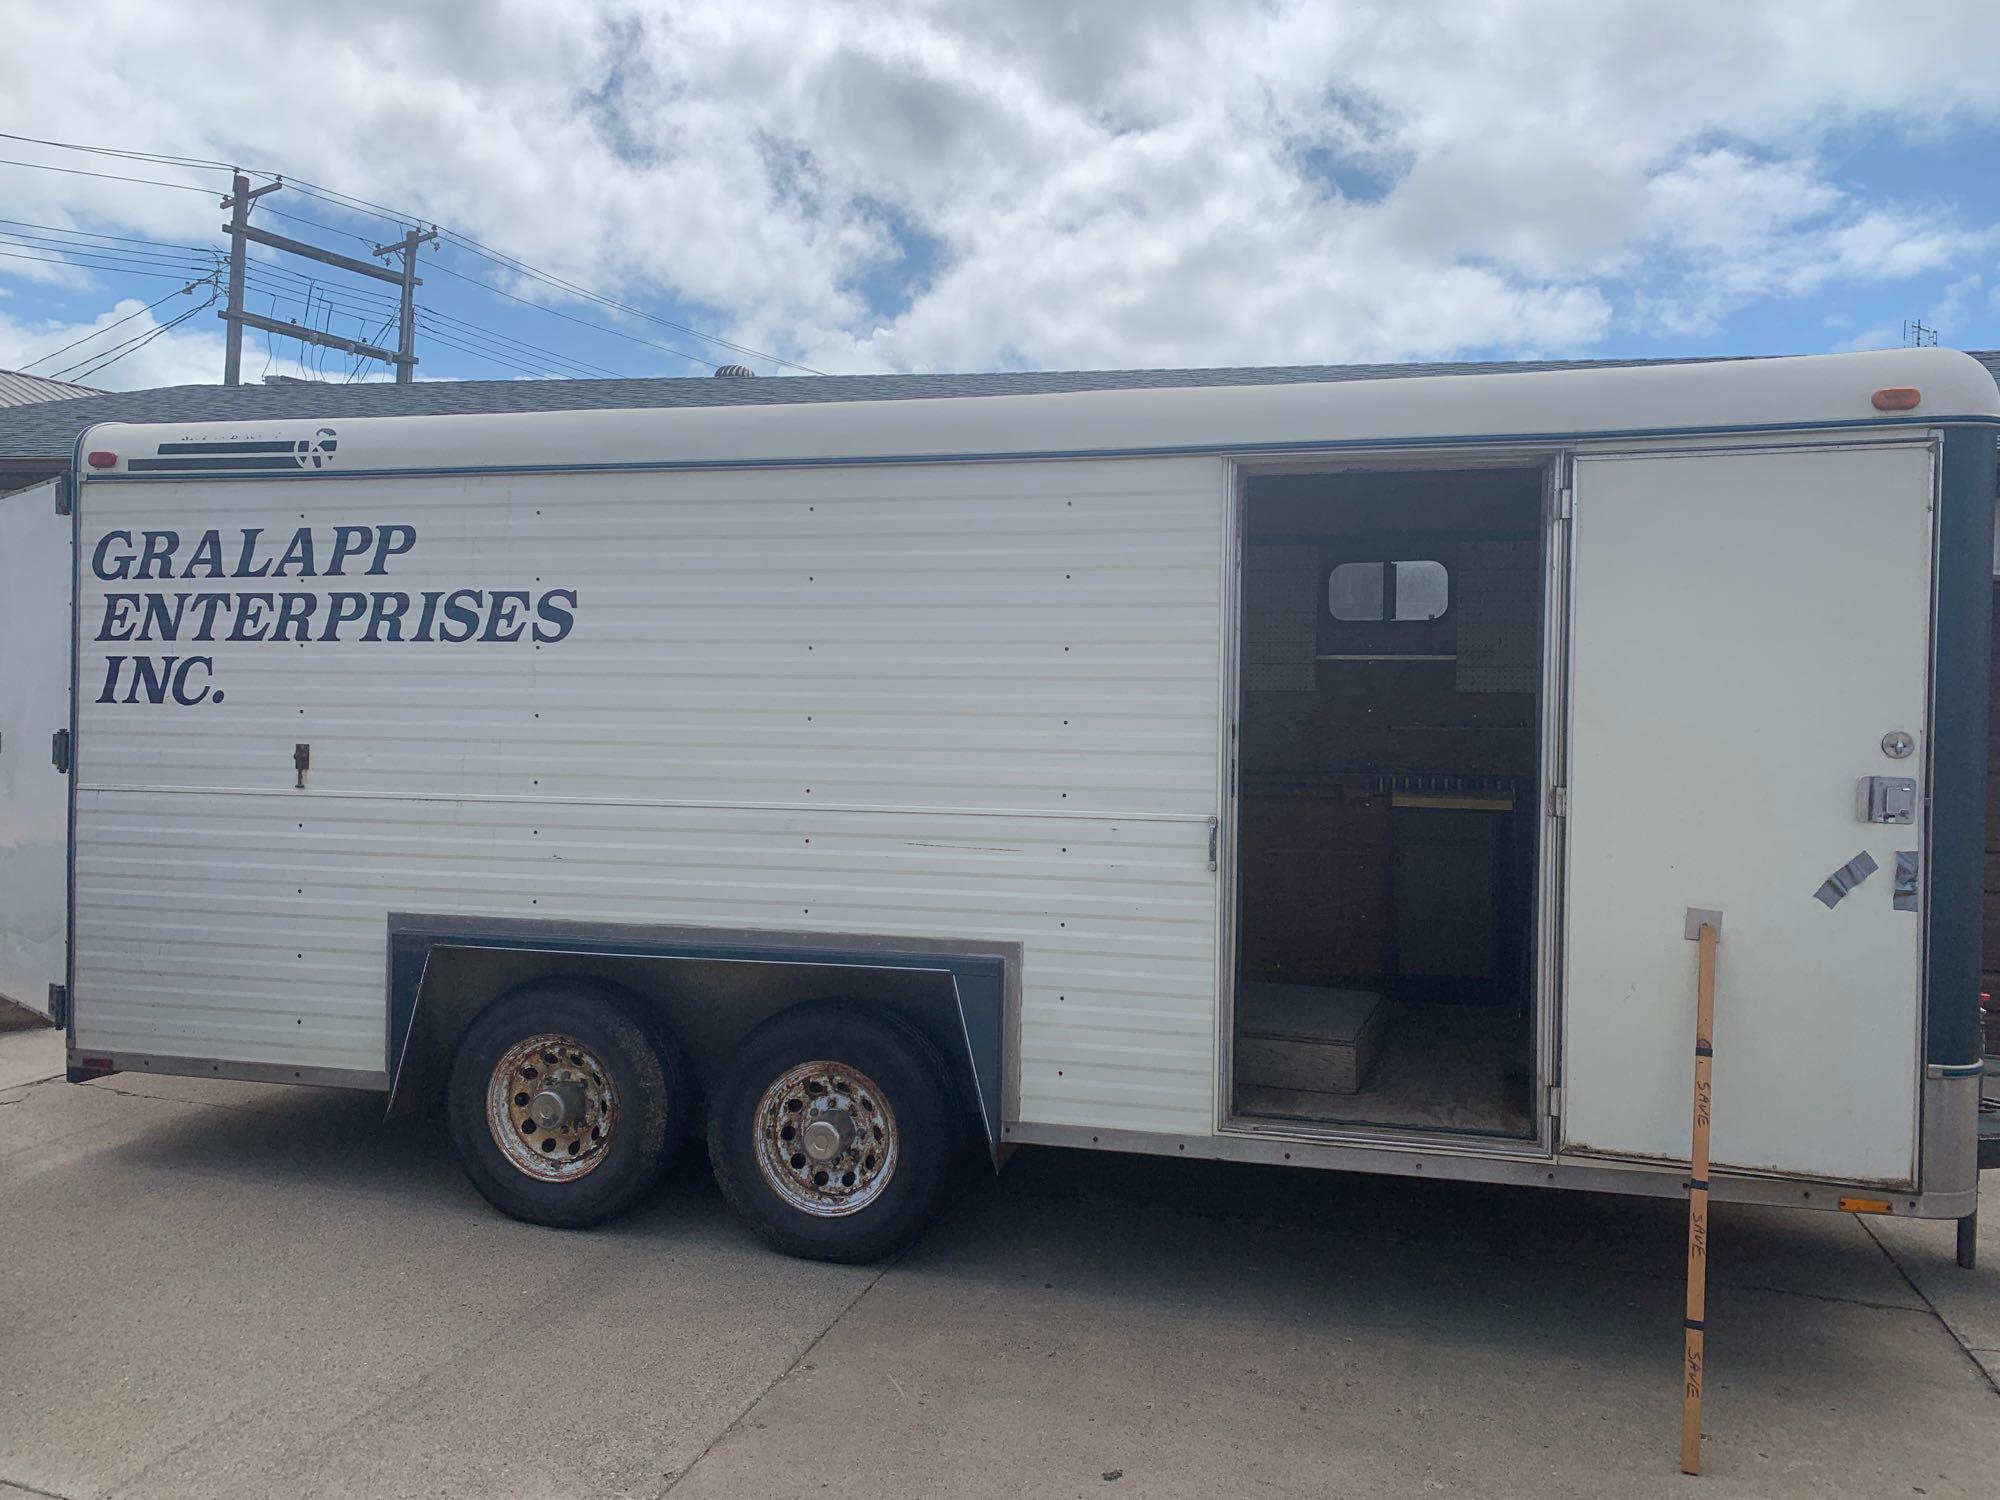 1992 Kiefer enclosed 8' x 18' insulated job trailer, swinging doors, 6 1/2' ceiling height, tandem